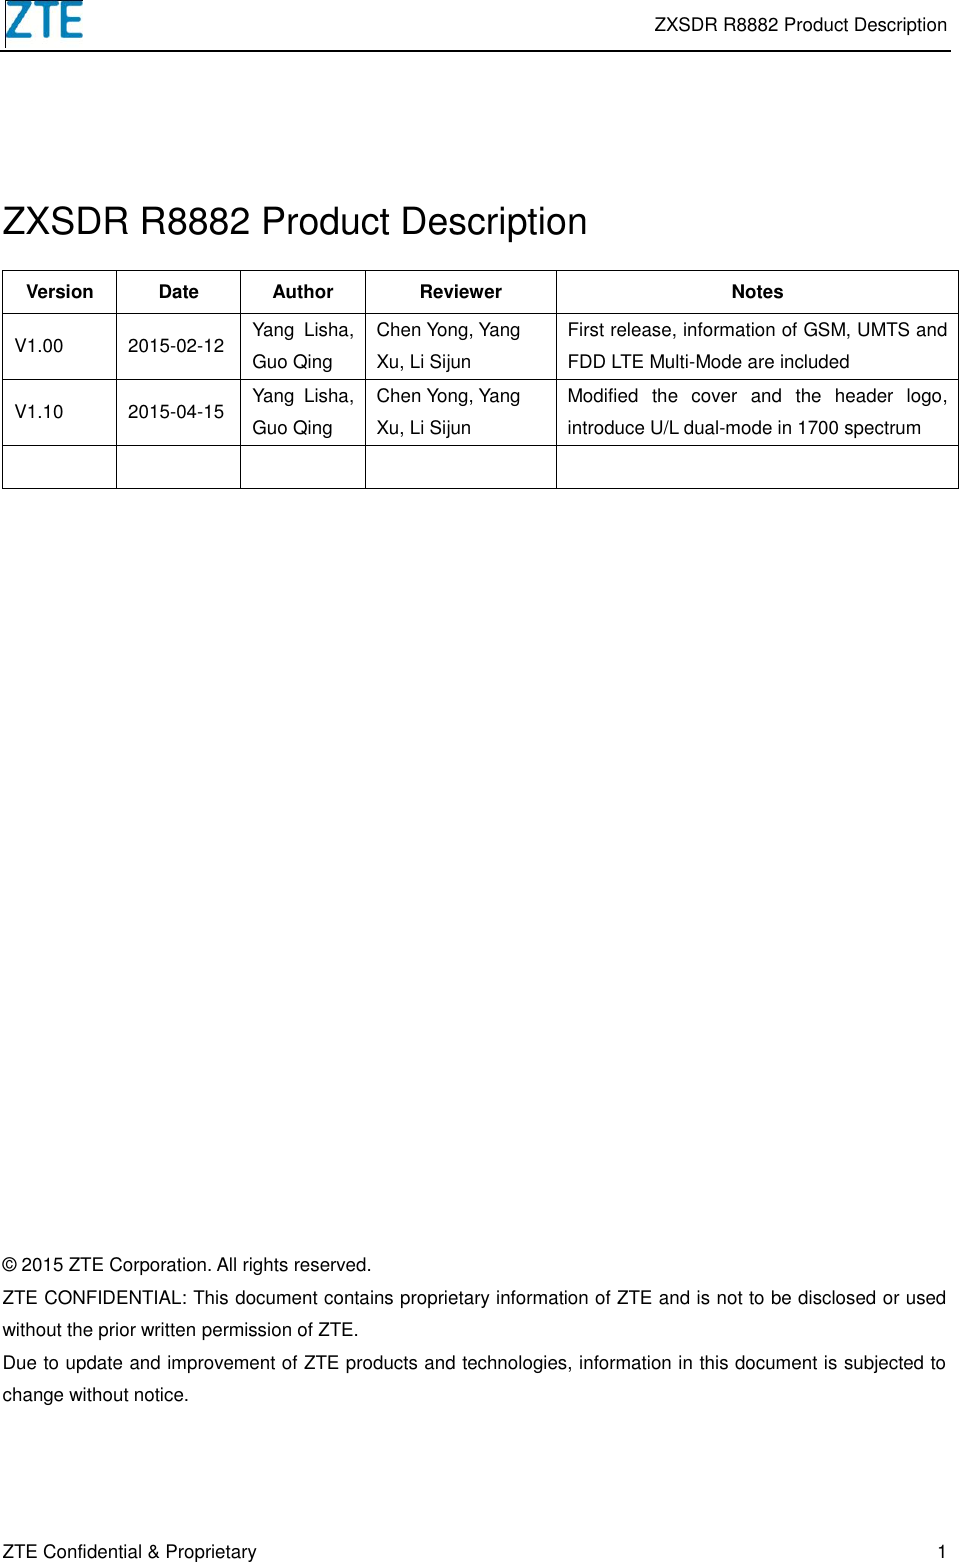  ZXSDR R8882 Product Description ZTE Confidential &amp; Proprietary 1 ZXSDR R8882 Product Description Version Date Author Reviewer Notes V1.00 2015-02-12 Yang  Lisha, Guo Qing Chen Yong, Yang Xu, Li Sijun First release, information of GSM, UMTS and FDD LTE Multi-Mode are included V1.10 2015-04-15 Yang  Lisha, Guo Qing Chen Yong, Yang Xu, Li Sijun Modified  the  cover  and  the  header  logo, introduce U/L dual-mode in 1700 spectrum          © 2015 ZTE Corporation. All rights reserved. ZTE CONFIDENTIAL: This document contains proprietary information of ZTE and is not to be disclosed or used without the prior written permission of ZTE. Due to update and improvement of ZTE products and technologies, information in this document is subjected to change without notice. 